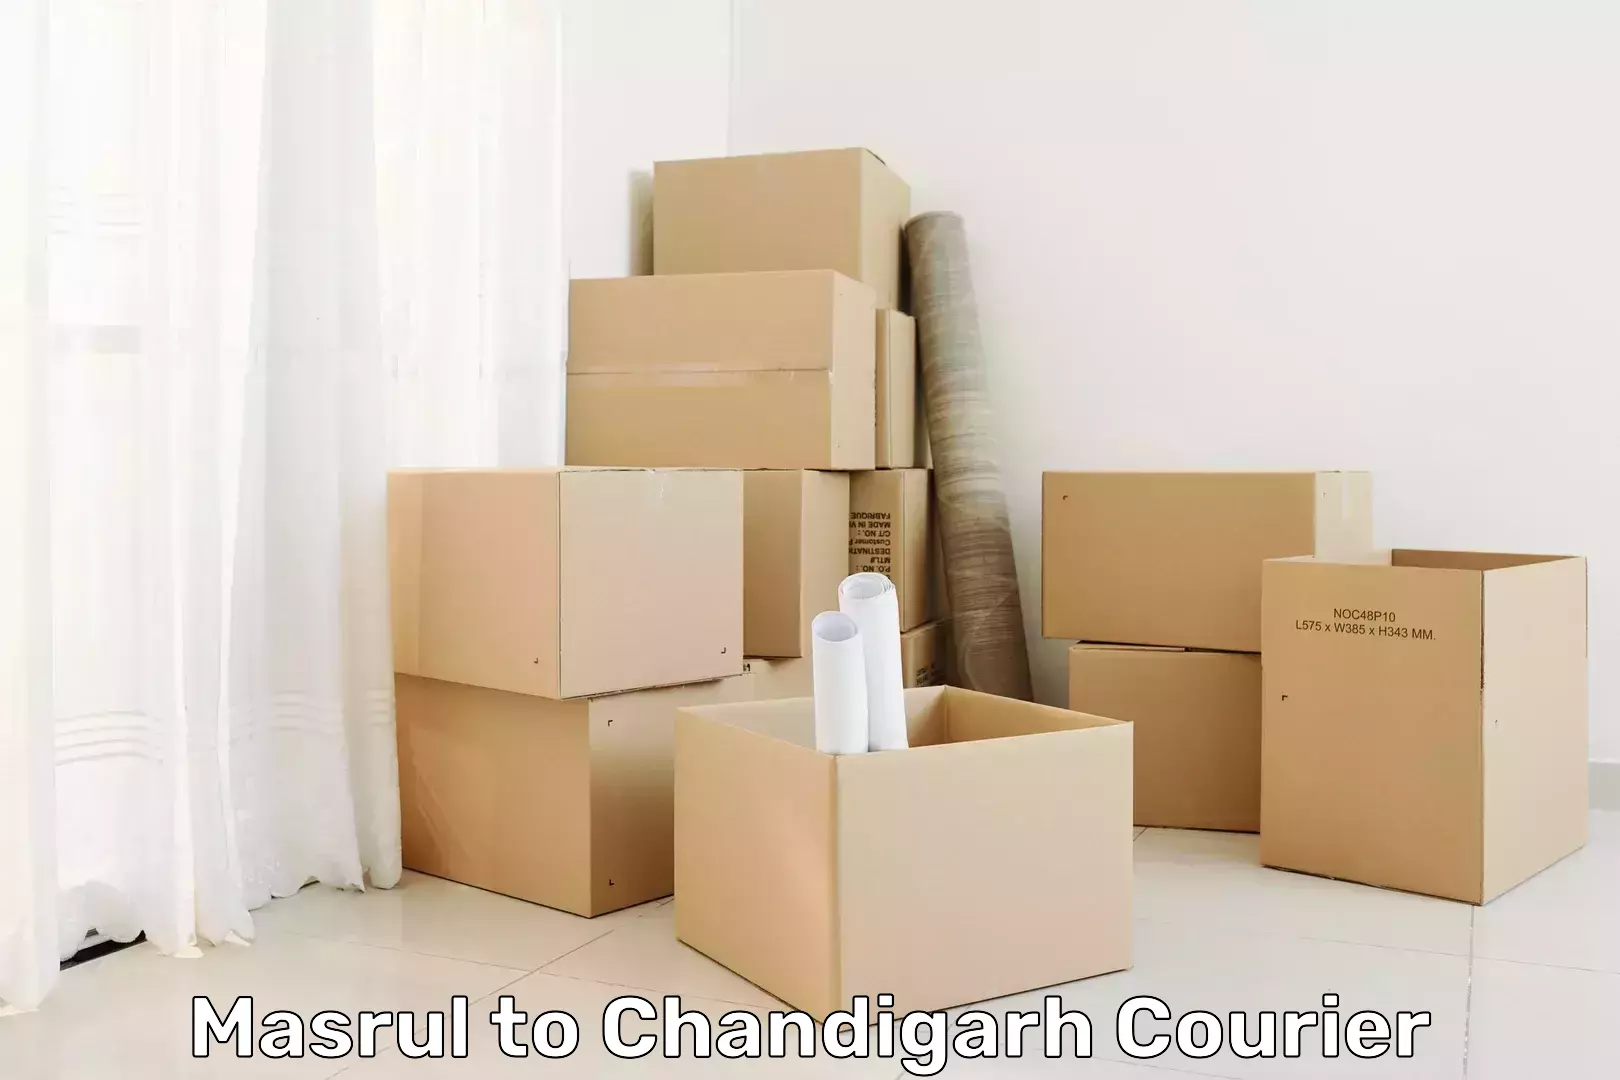 Sustainable shipping practices Masrul to Chandigarh